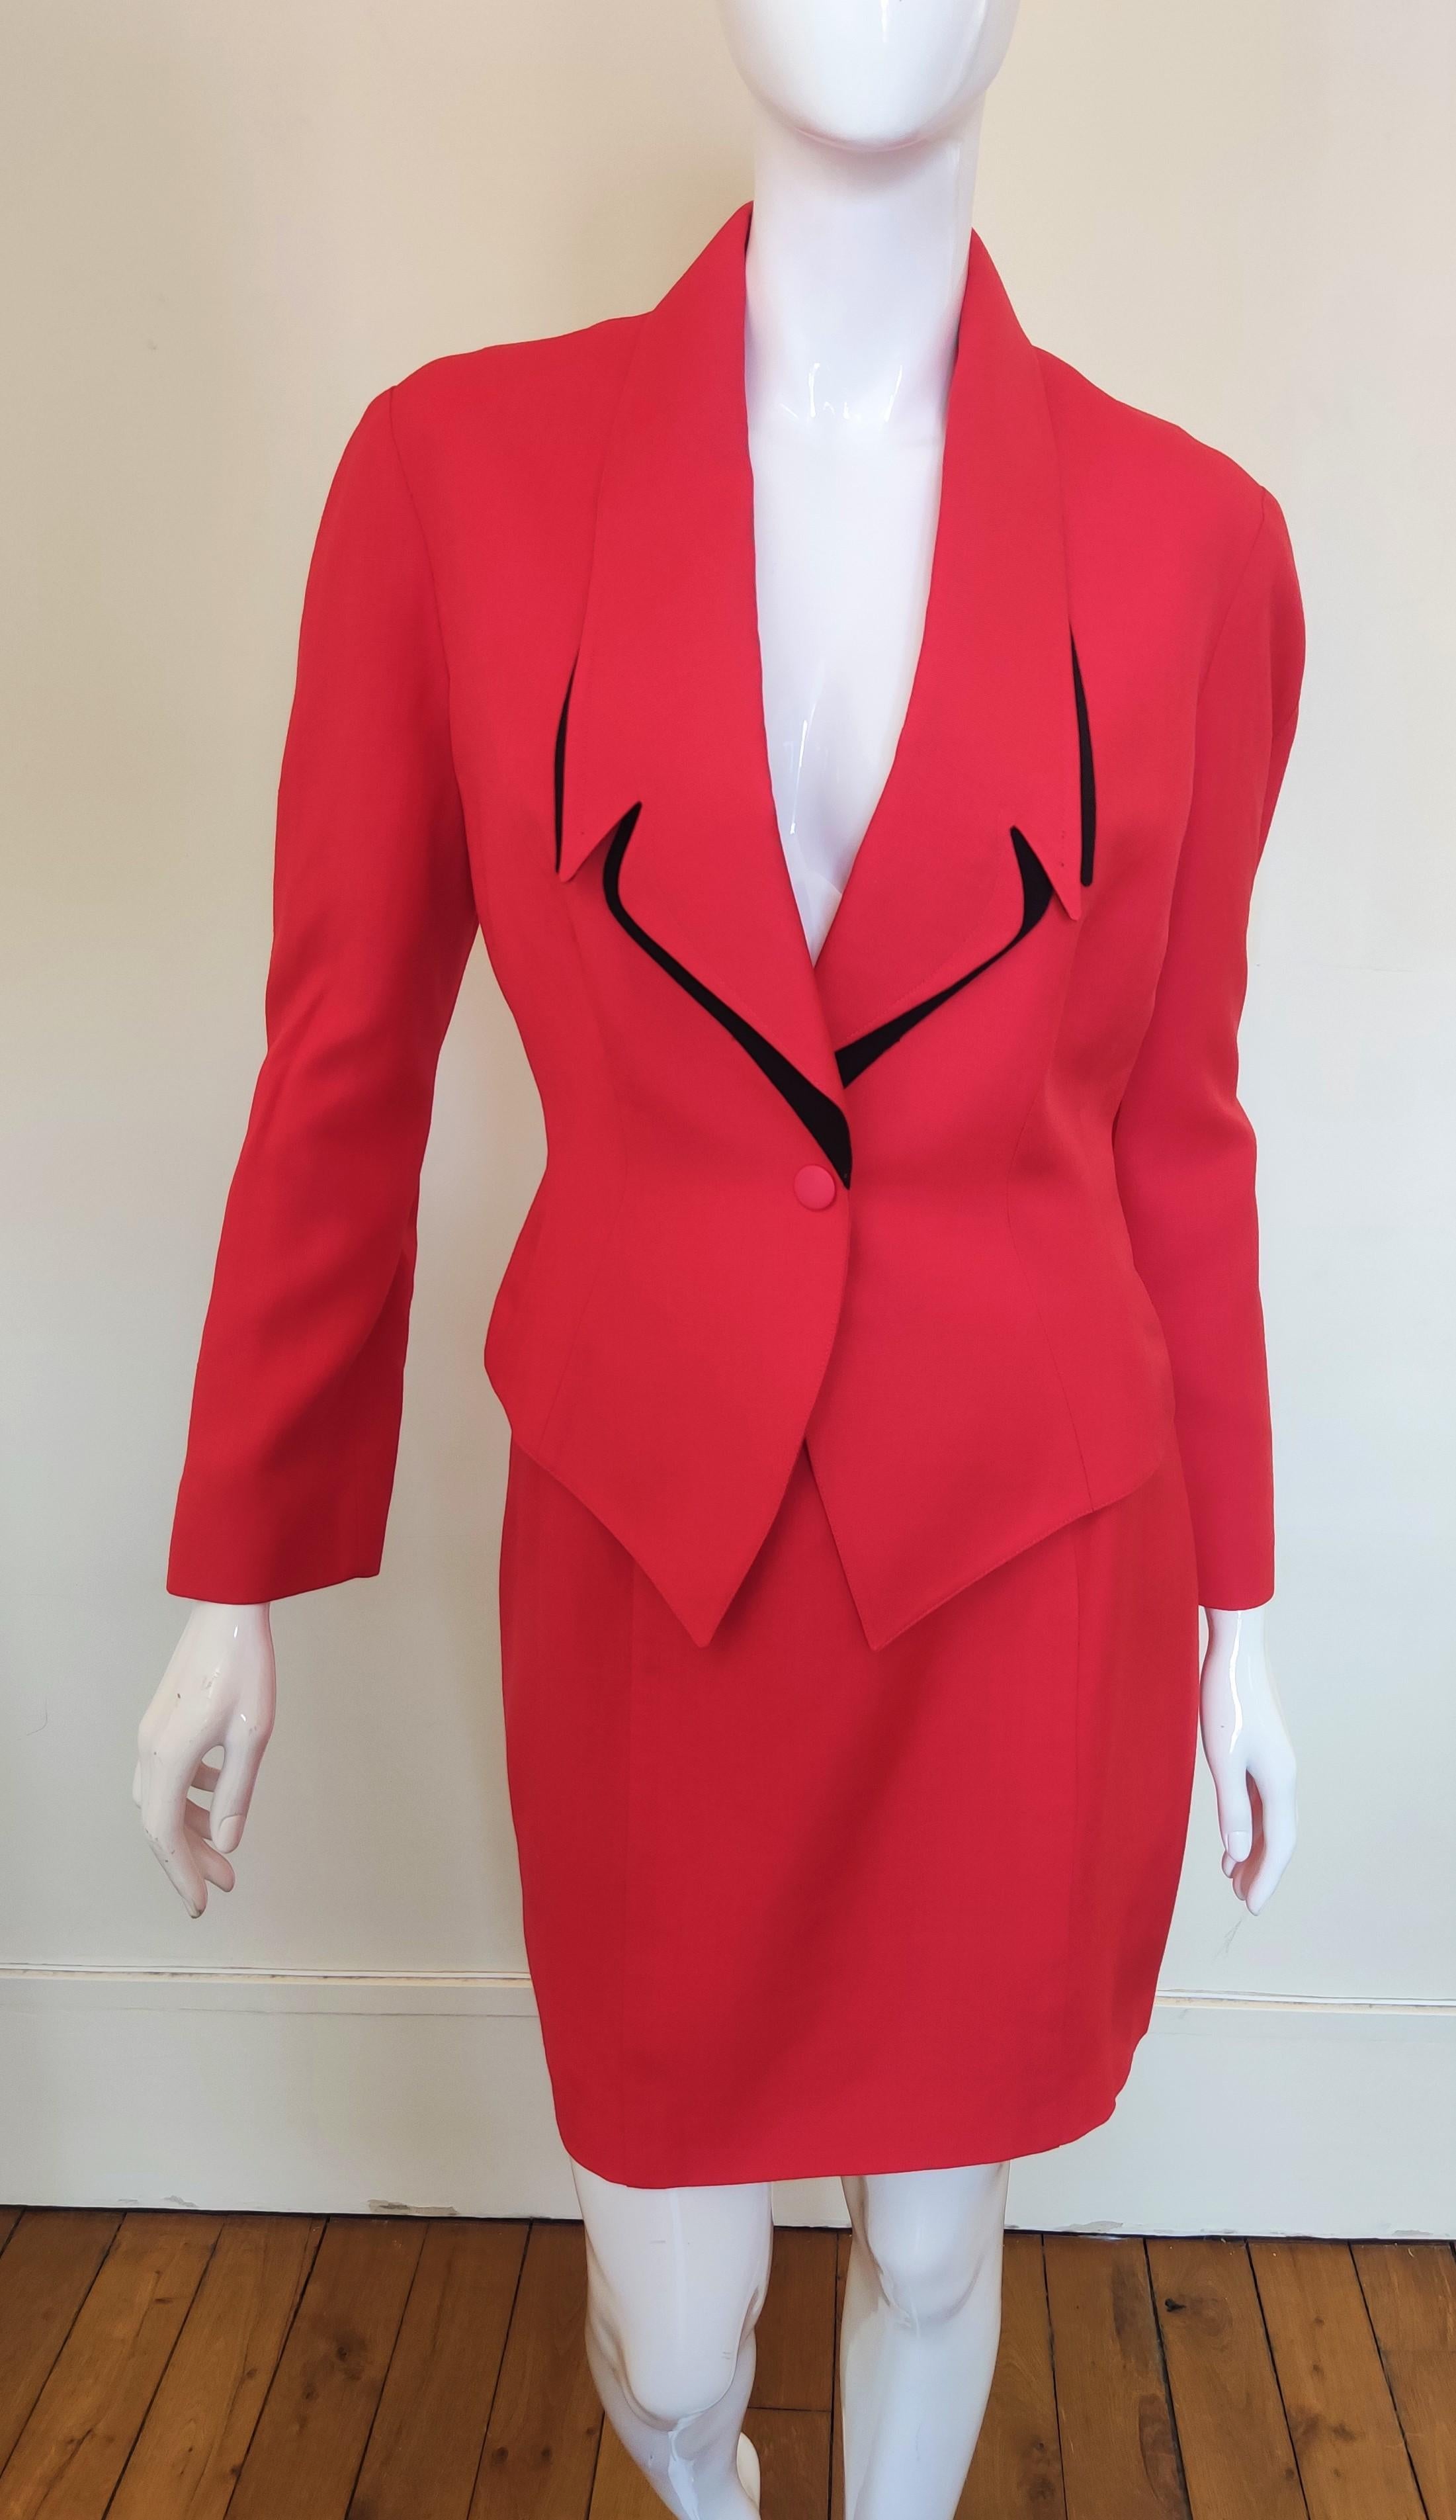 Amazing vampire suit by Thierry Mugler!
With shoulder pads.
Wondeful silhouette! It emphasizes the waist.
The collar can be worn as a usual or stood up (vampire look).

EXCELLENT condition!

SIZE
Large.
Marked size: FR40.
Please, read the